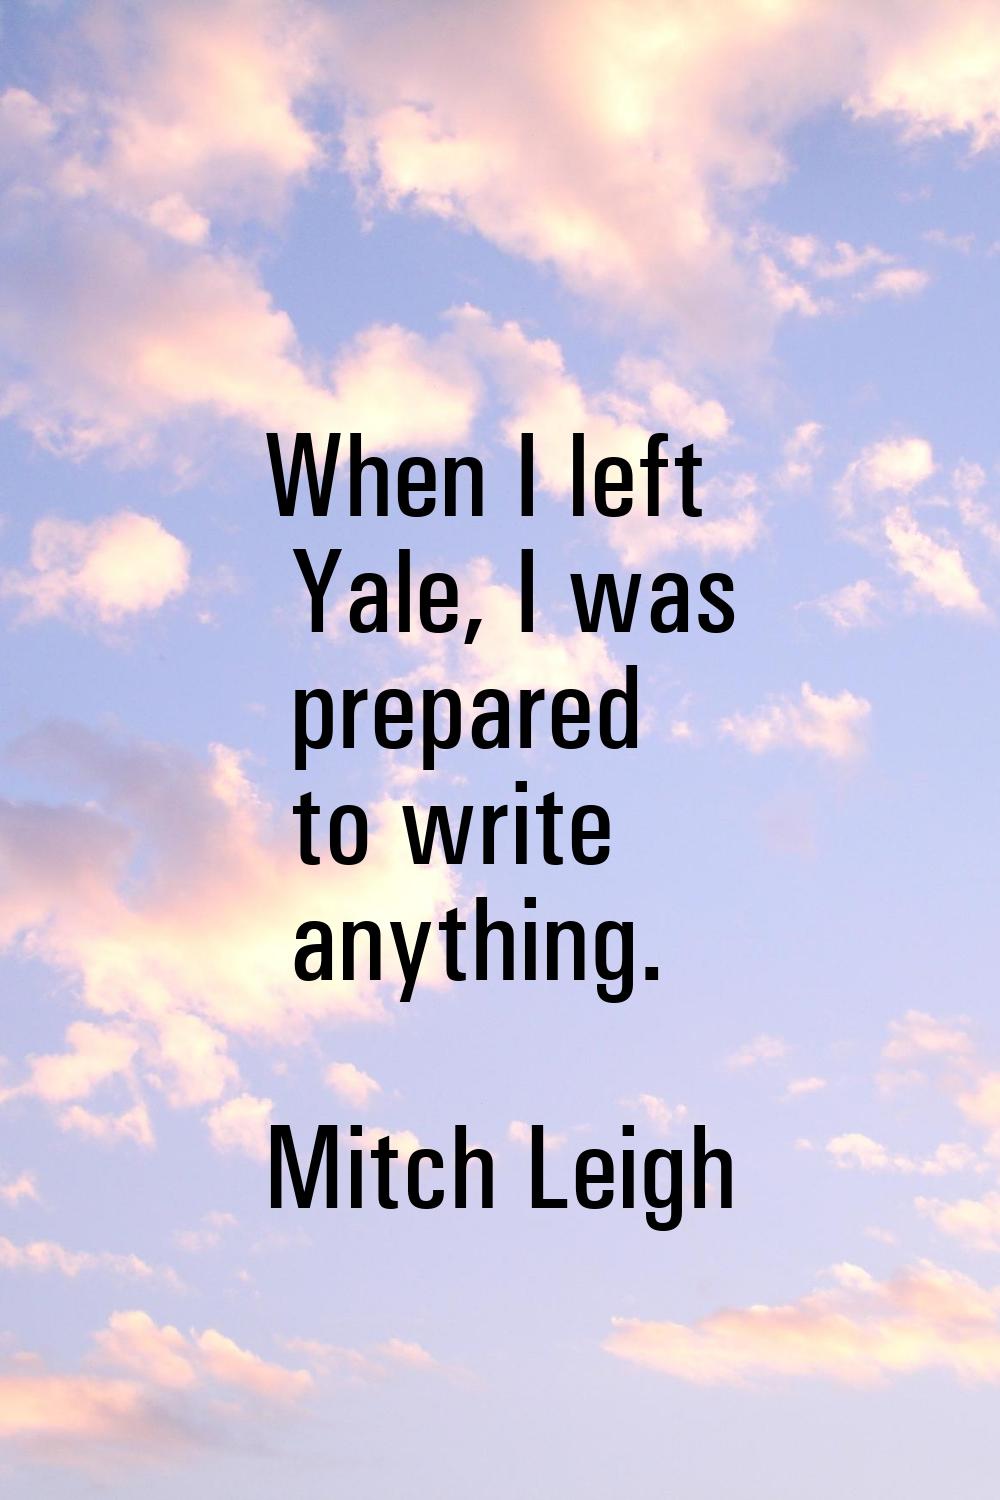 When I left Yale, I was prepared to write anything.